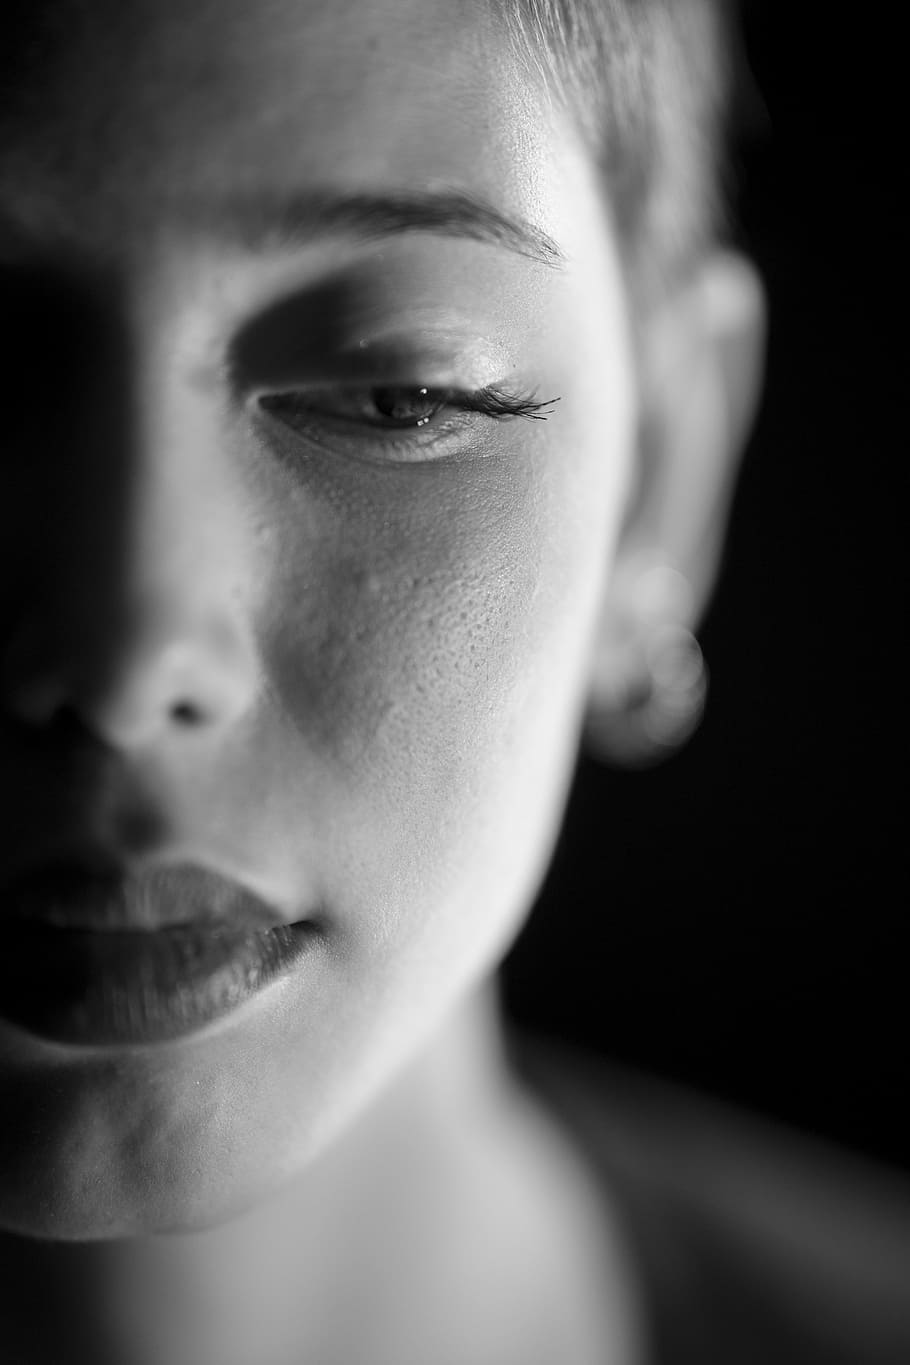 grayscale photography, woman, face, portrait, women's, black and white, exposure, overview, human, model